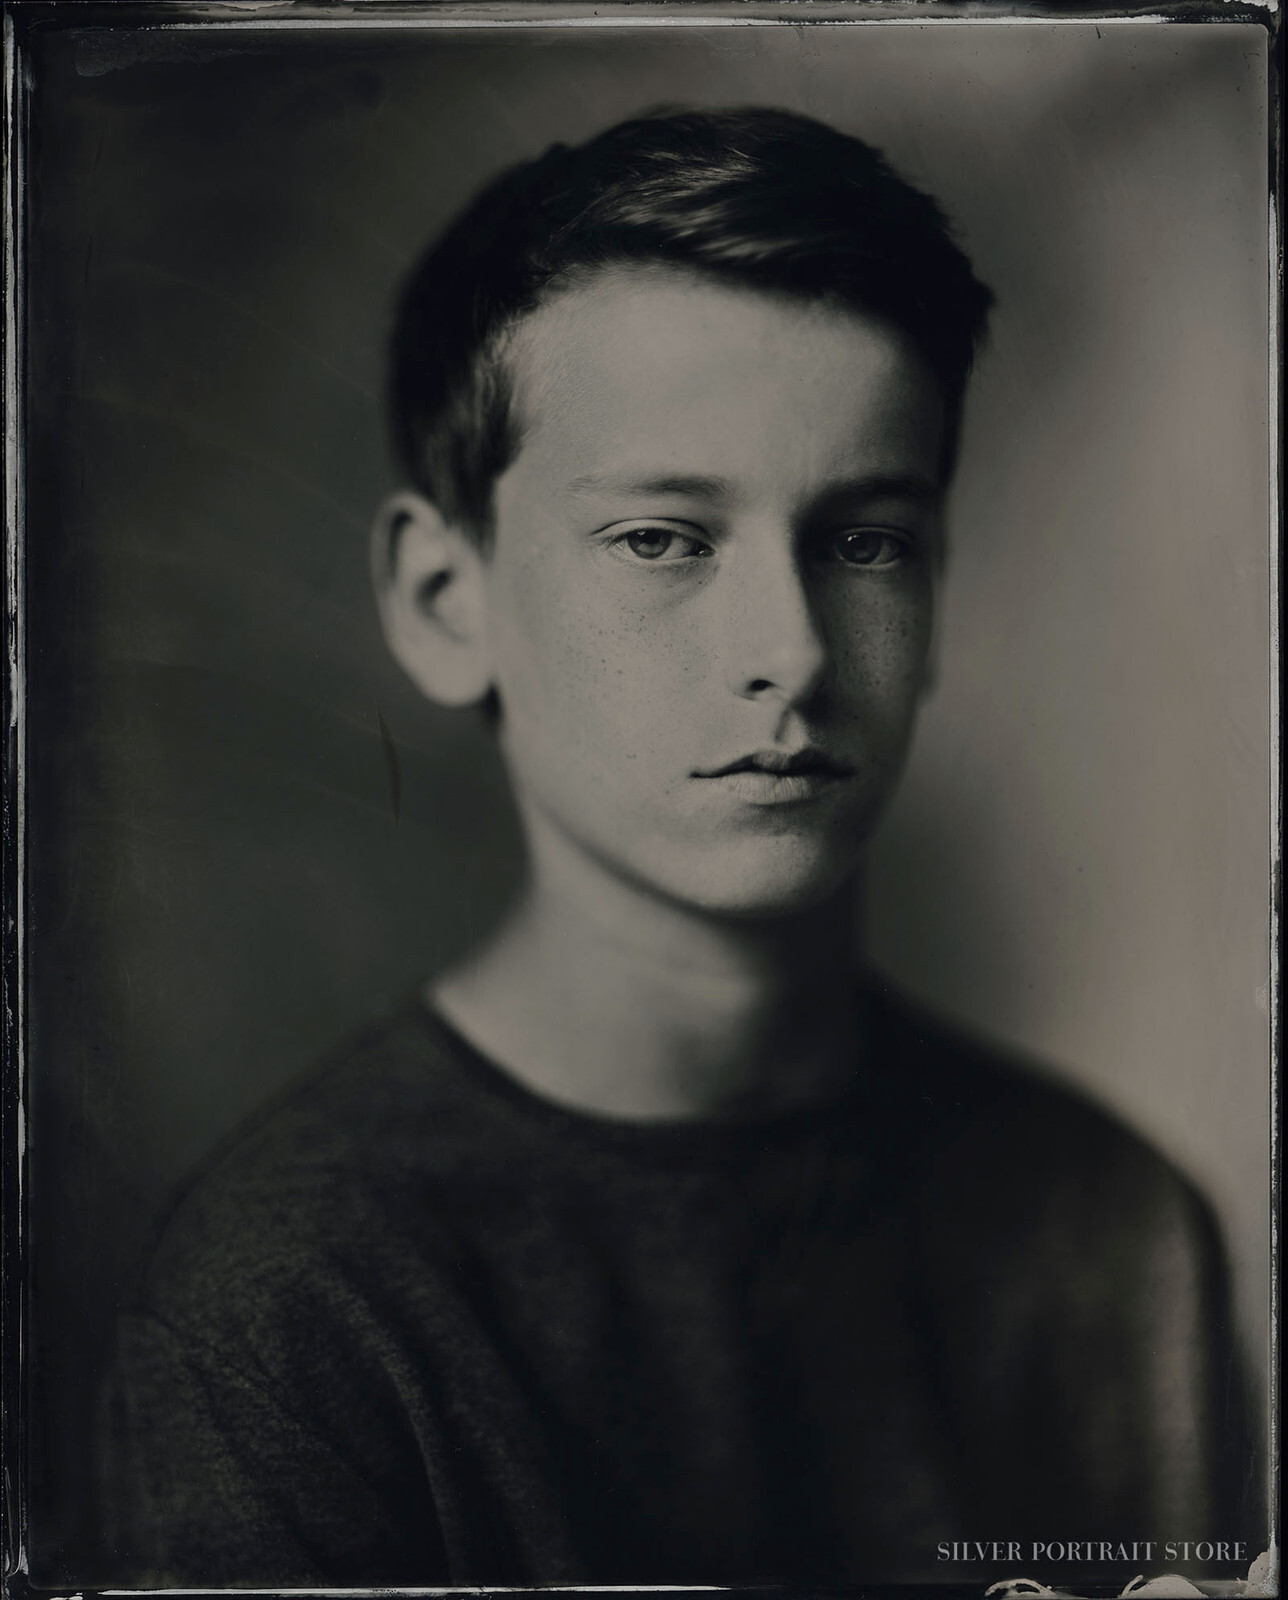 Finn-Silver Portrait Store-scan from Wet plate collodion-Tintype 20 x 25 cm.